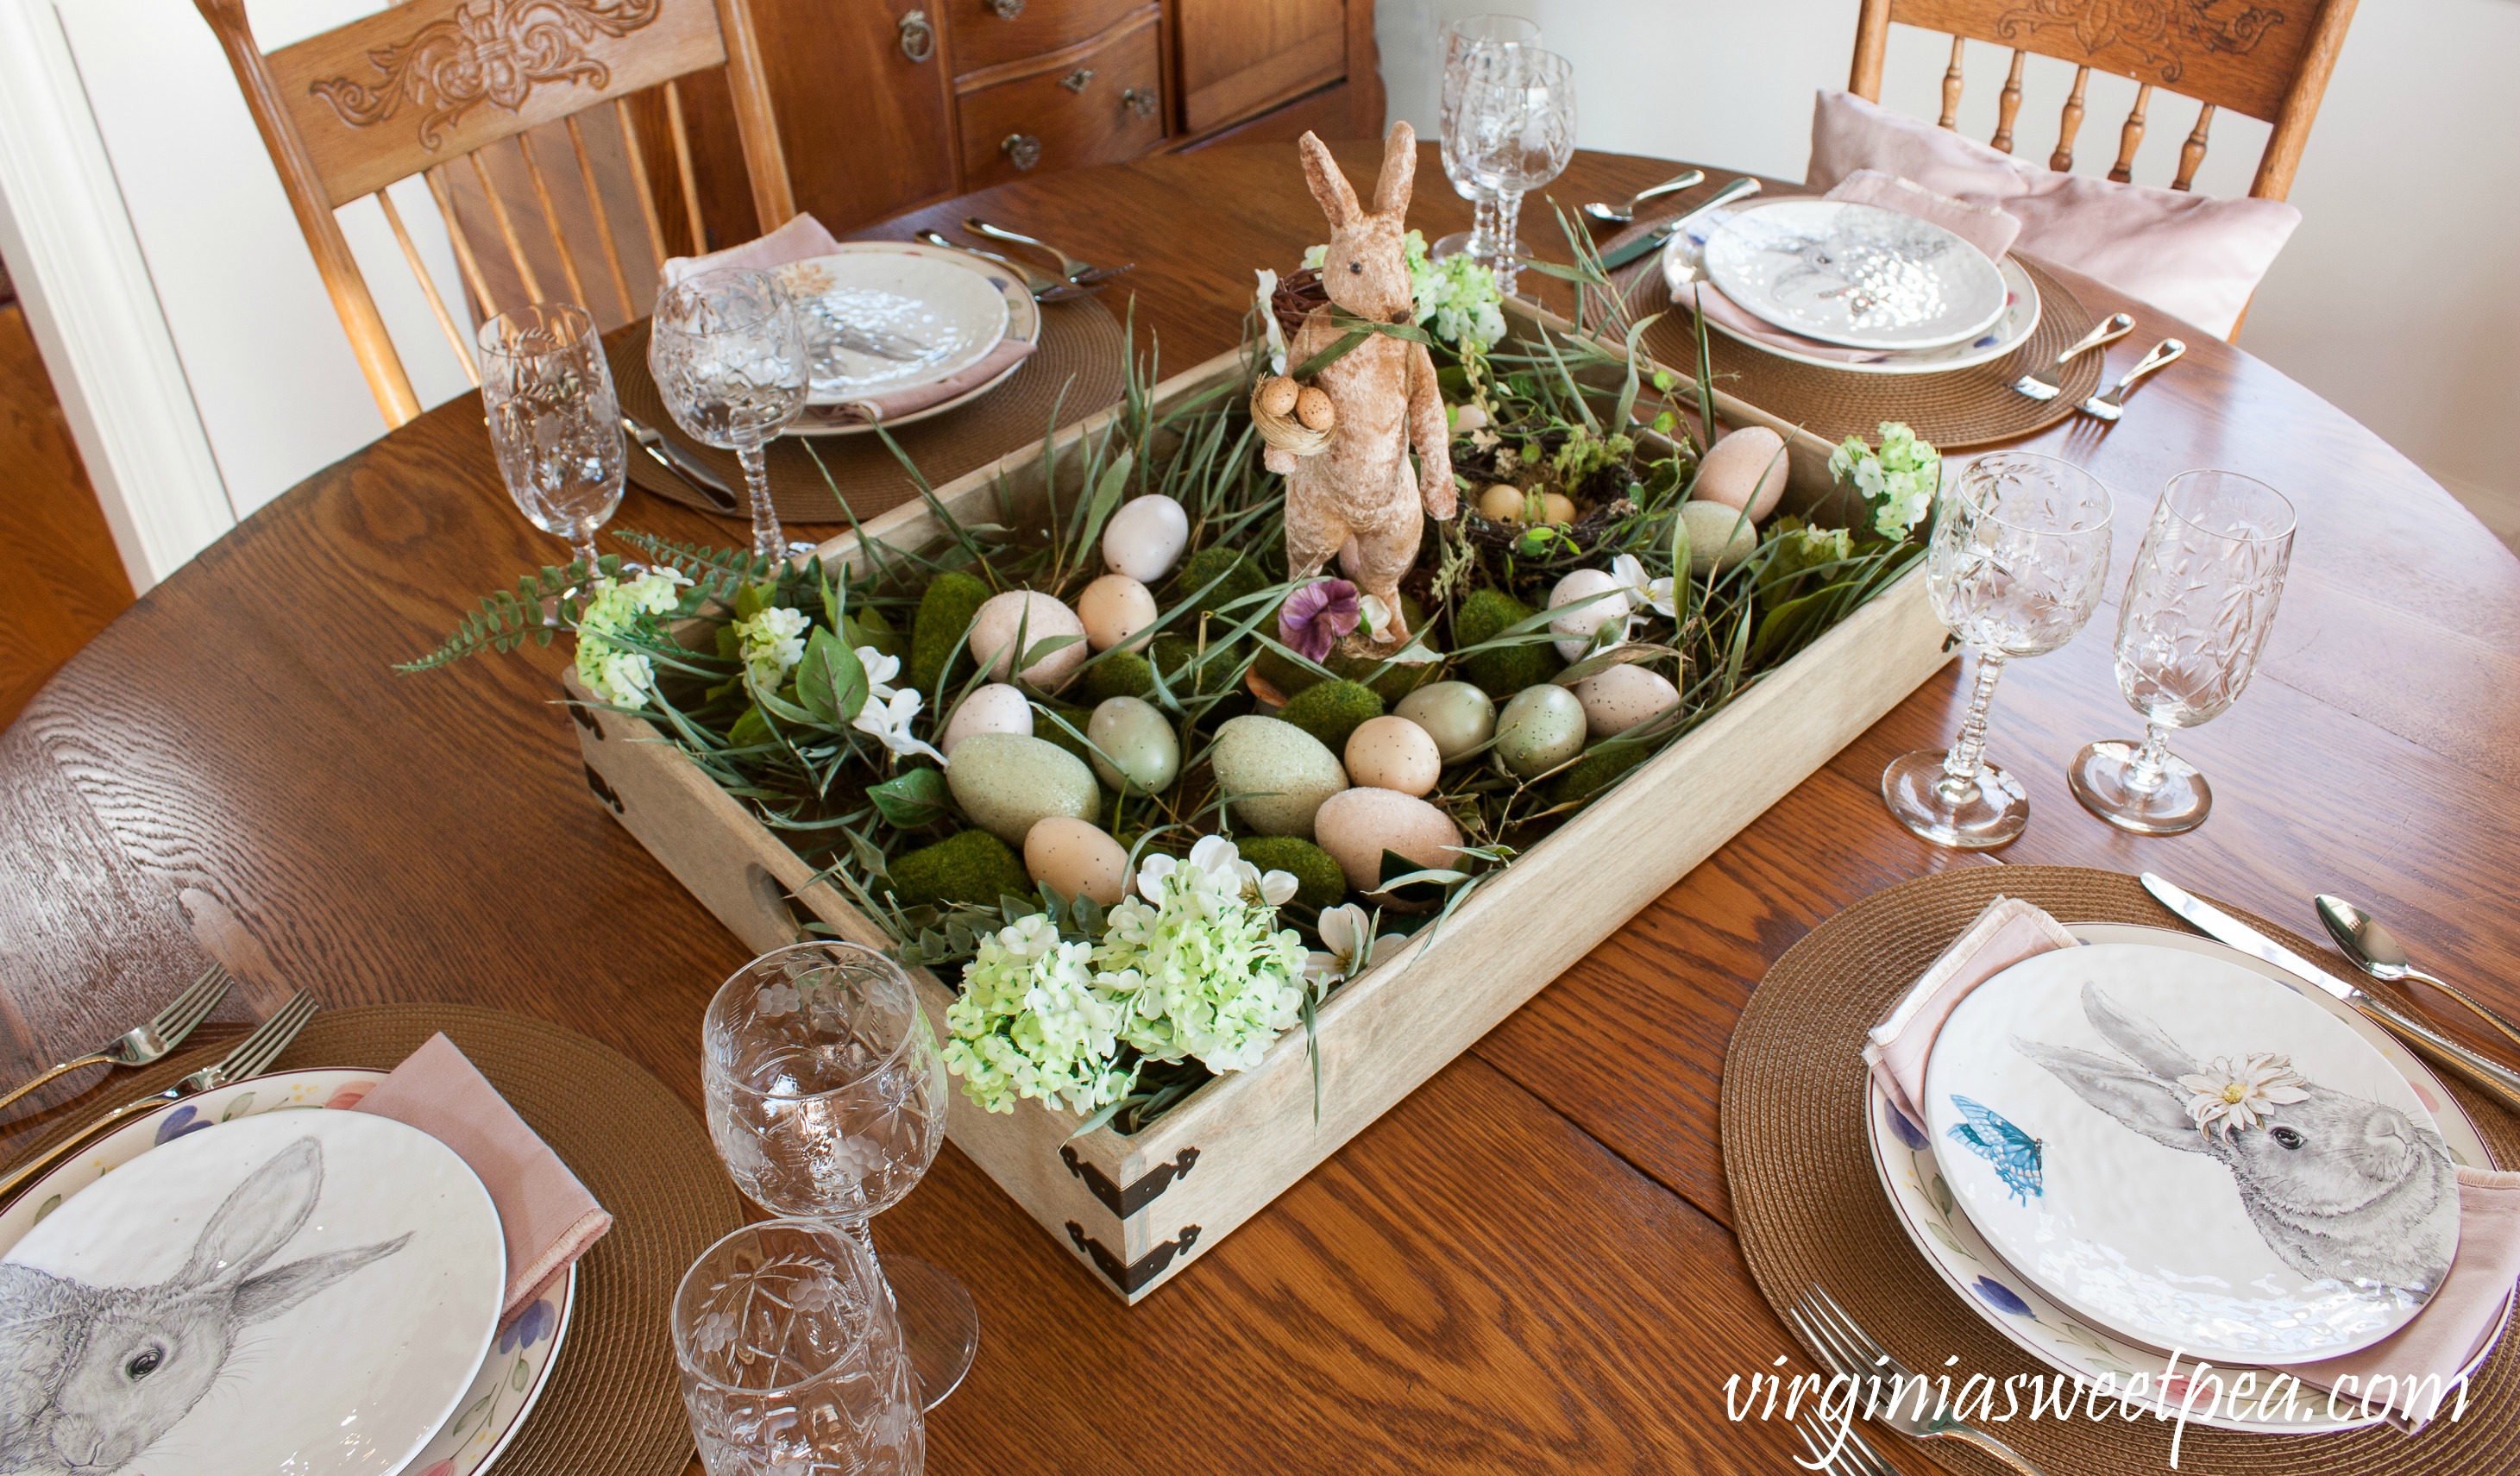 Farmhouse Style Easter Centerpiece and Table - Learn how to get this look for your Easter table. #easter #eastercenterpiece #eastertablescape #farmhouse #farmhousecenterpiece #farmhousetable #eastertable